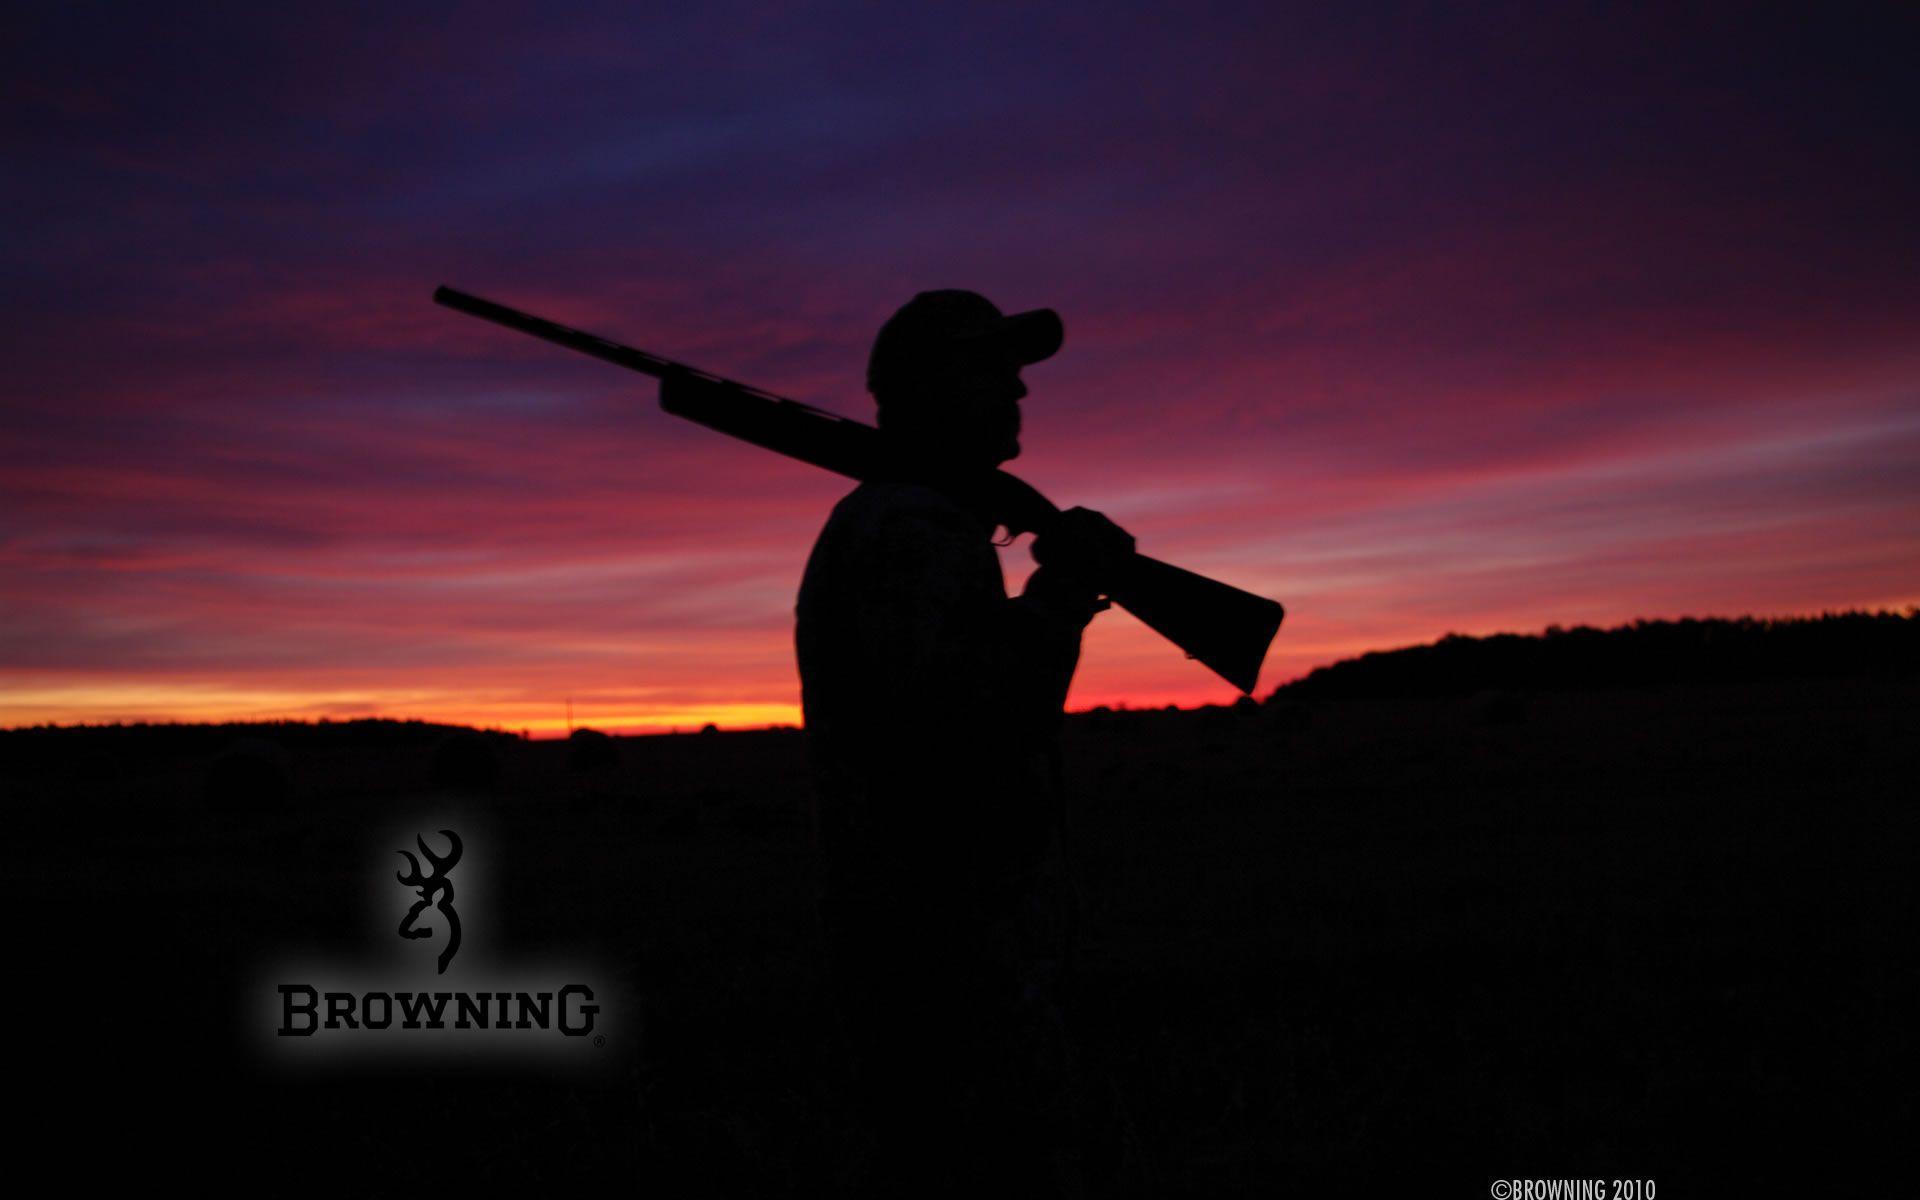 Browning Background